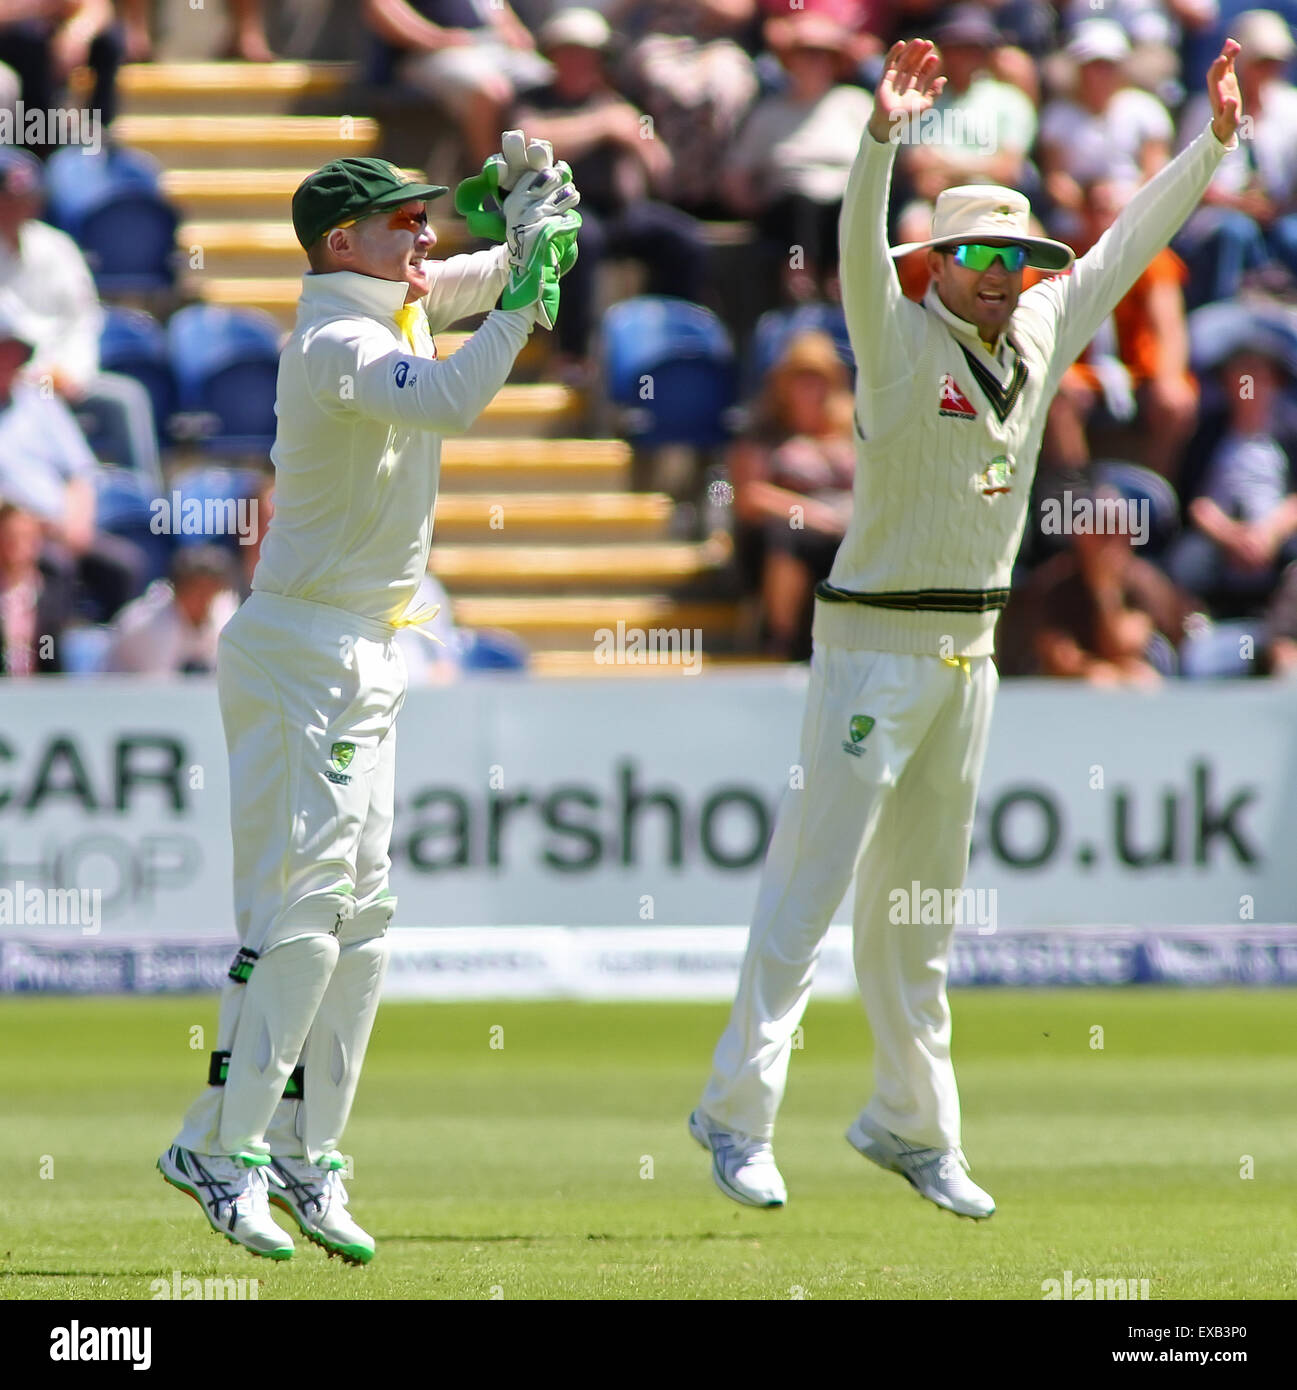 CARDIFF, WALES - JULY 10: Brad Haddin of Australia catches the ball to dismiss Gary Ballance of England during day three of the 1st Investec Ashes Test match between England and Australia at SWALEC Stadium on July 10, 2015 in Cardiff, United Kingdom. (Photo by Mitchell Gunn/ESPA) *** Local Caption ***Brad Haddin, Michael Clarke Stock Photo